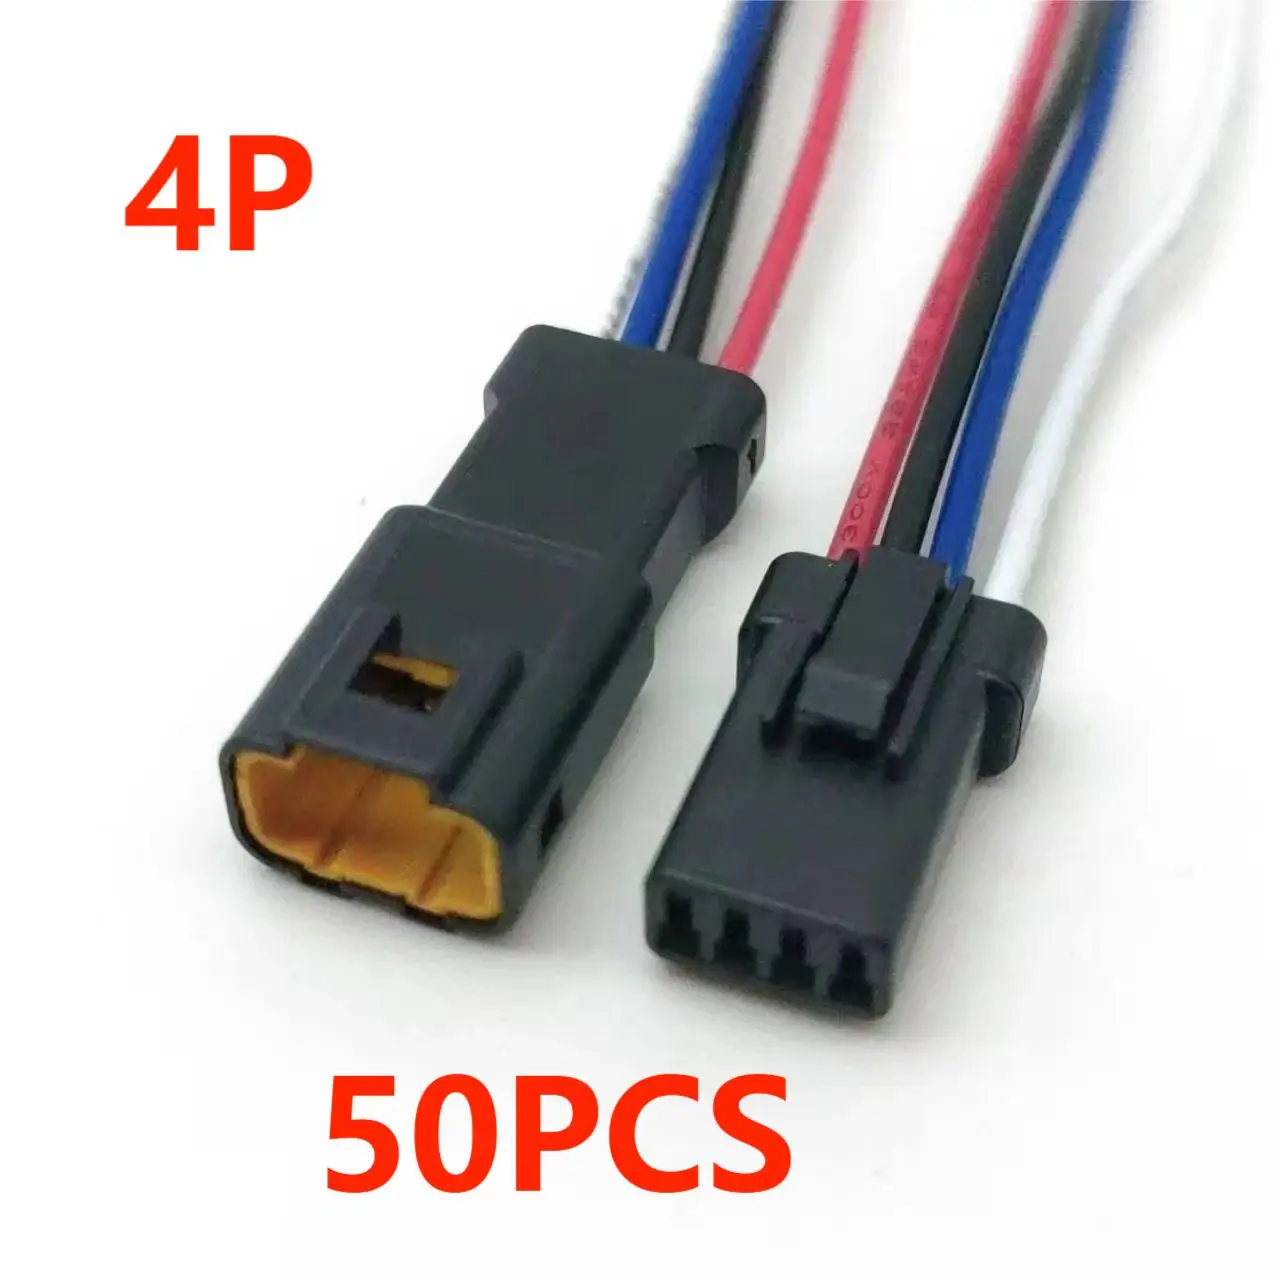 

50PCS 2P 3P 4P 6P 8P 0.6 MM Waterproof Wire Connector Plug Male And Female Socket With Cable JST JWPF Electrical C